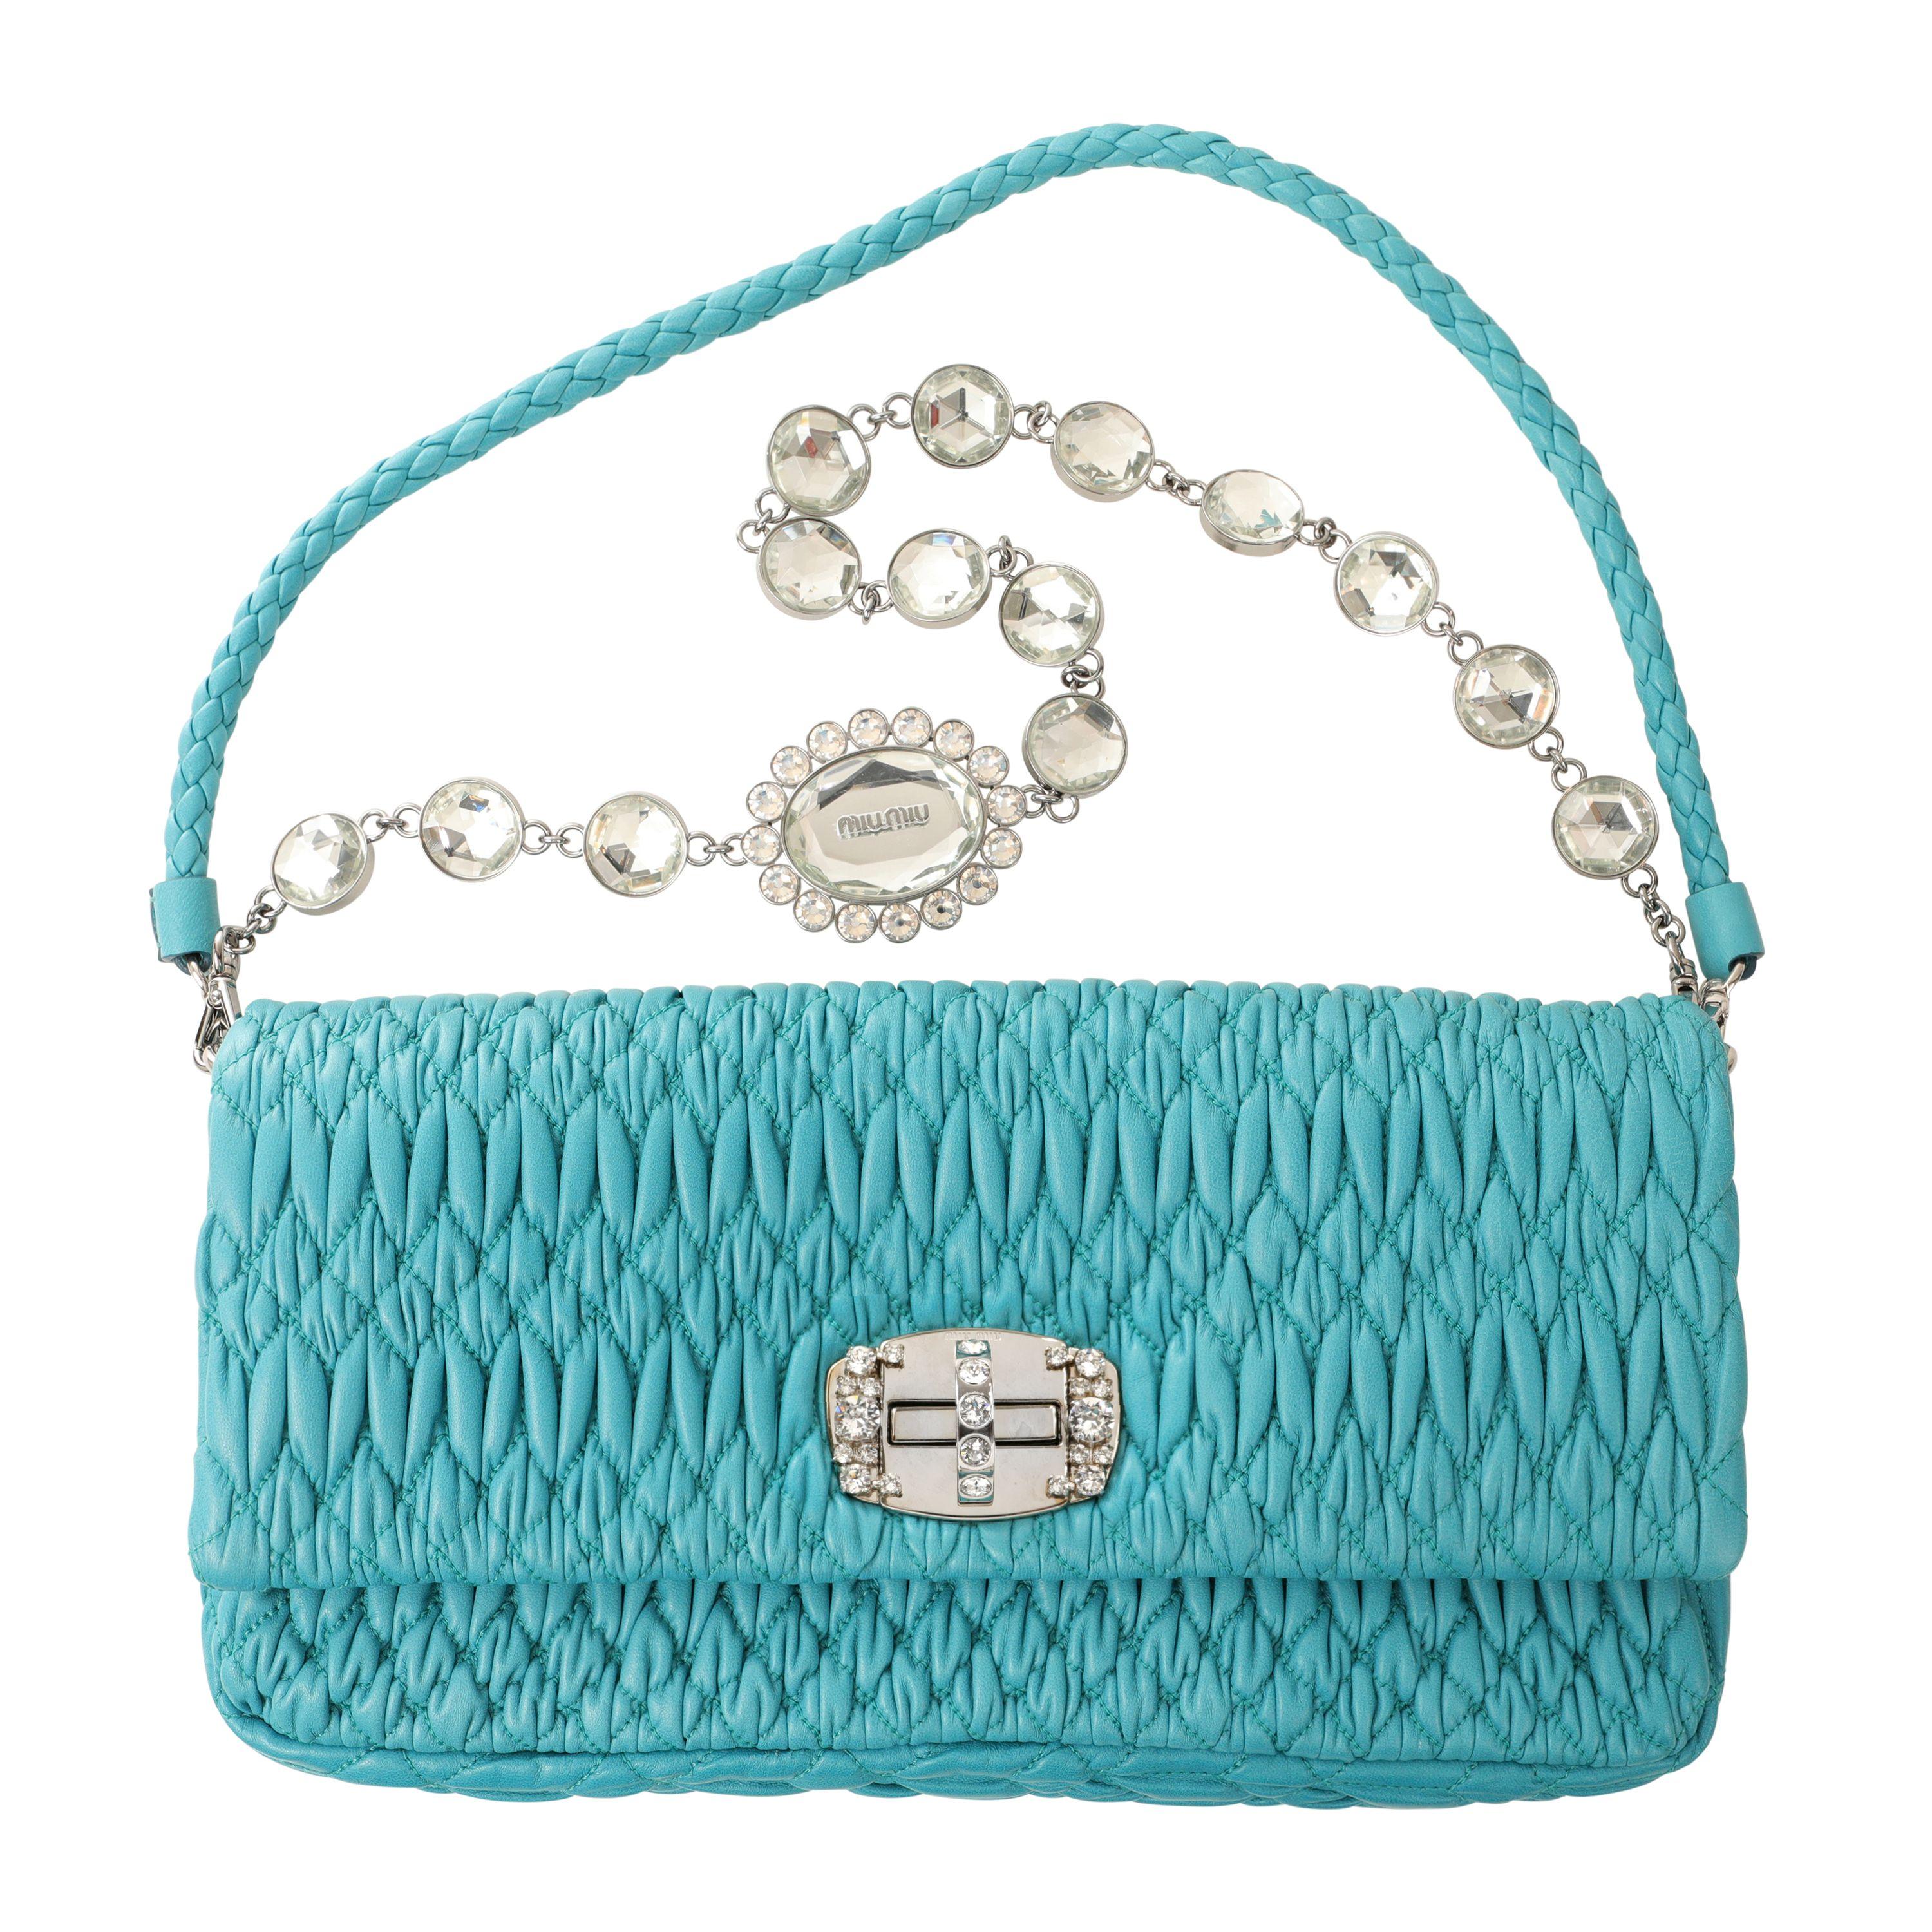 This authentic Miu Miu Turquoise Crystal Cloquè Small Bag is in pristine condition.  The iconic design features turquoise quilted Nappa leather and a crystal turn lock closure.  May be carried by the detachable leather strap or the decorative